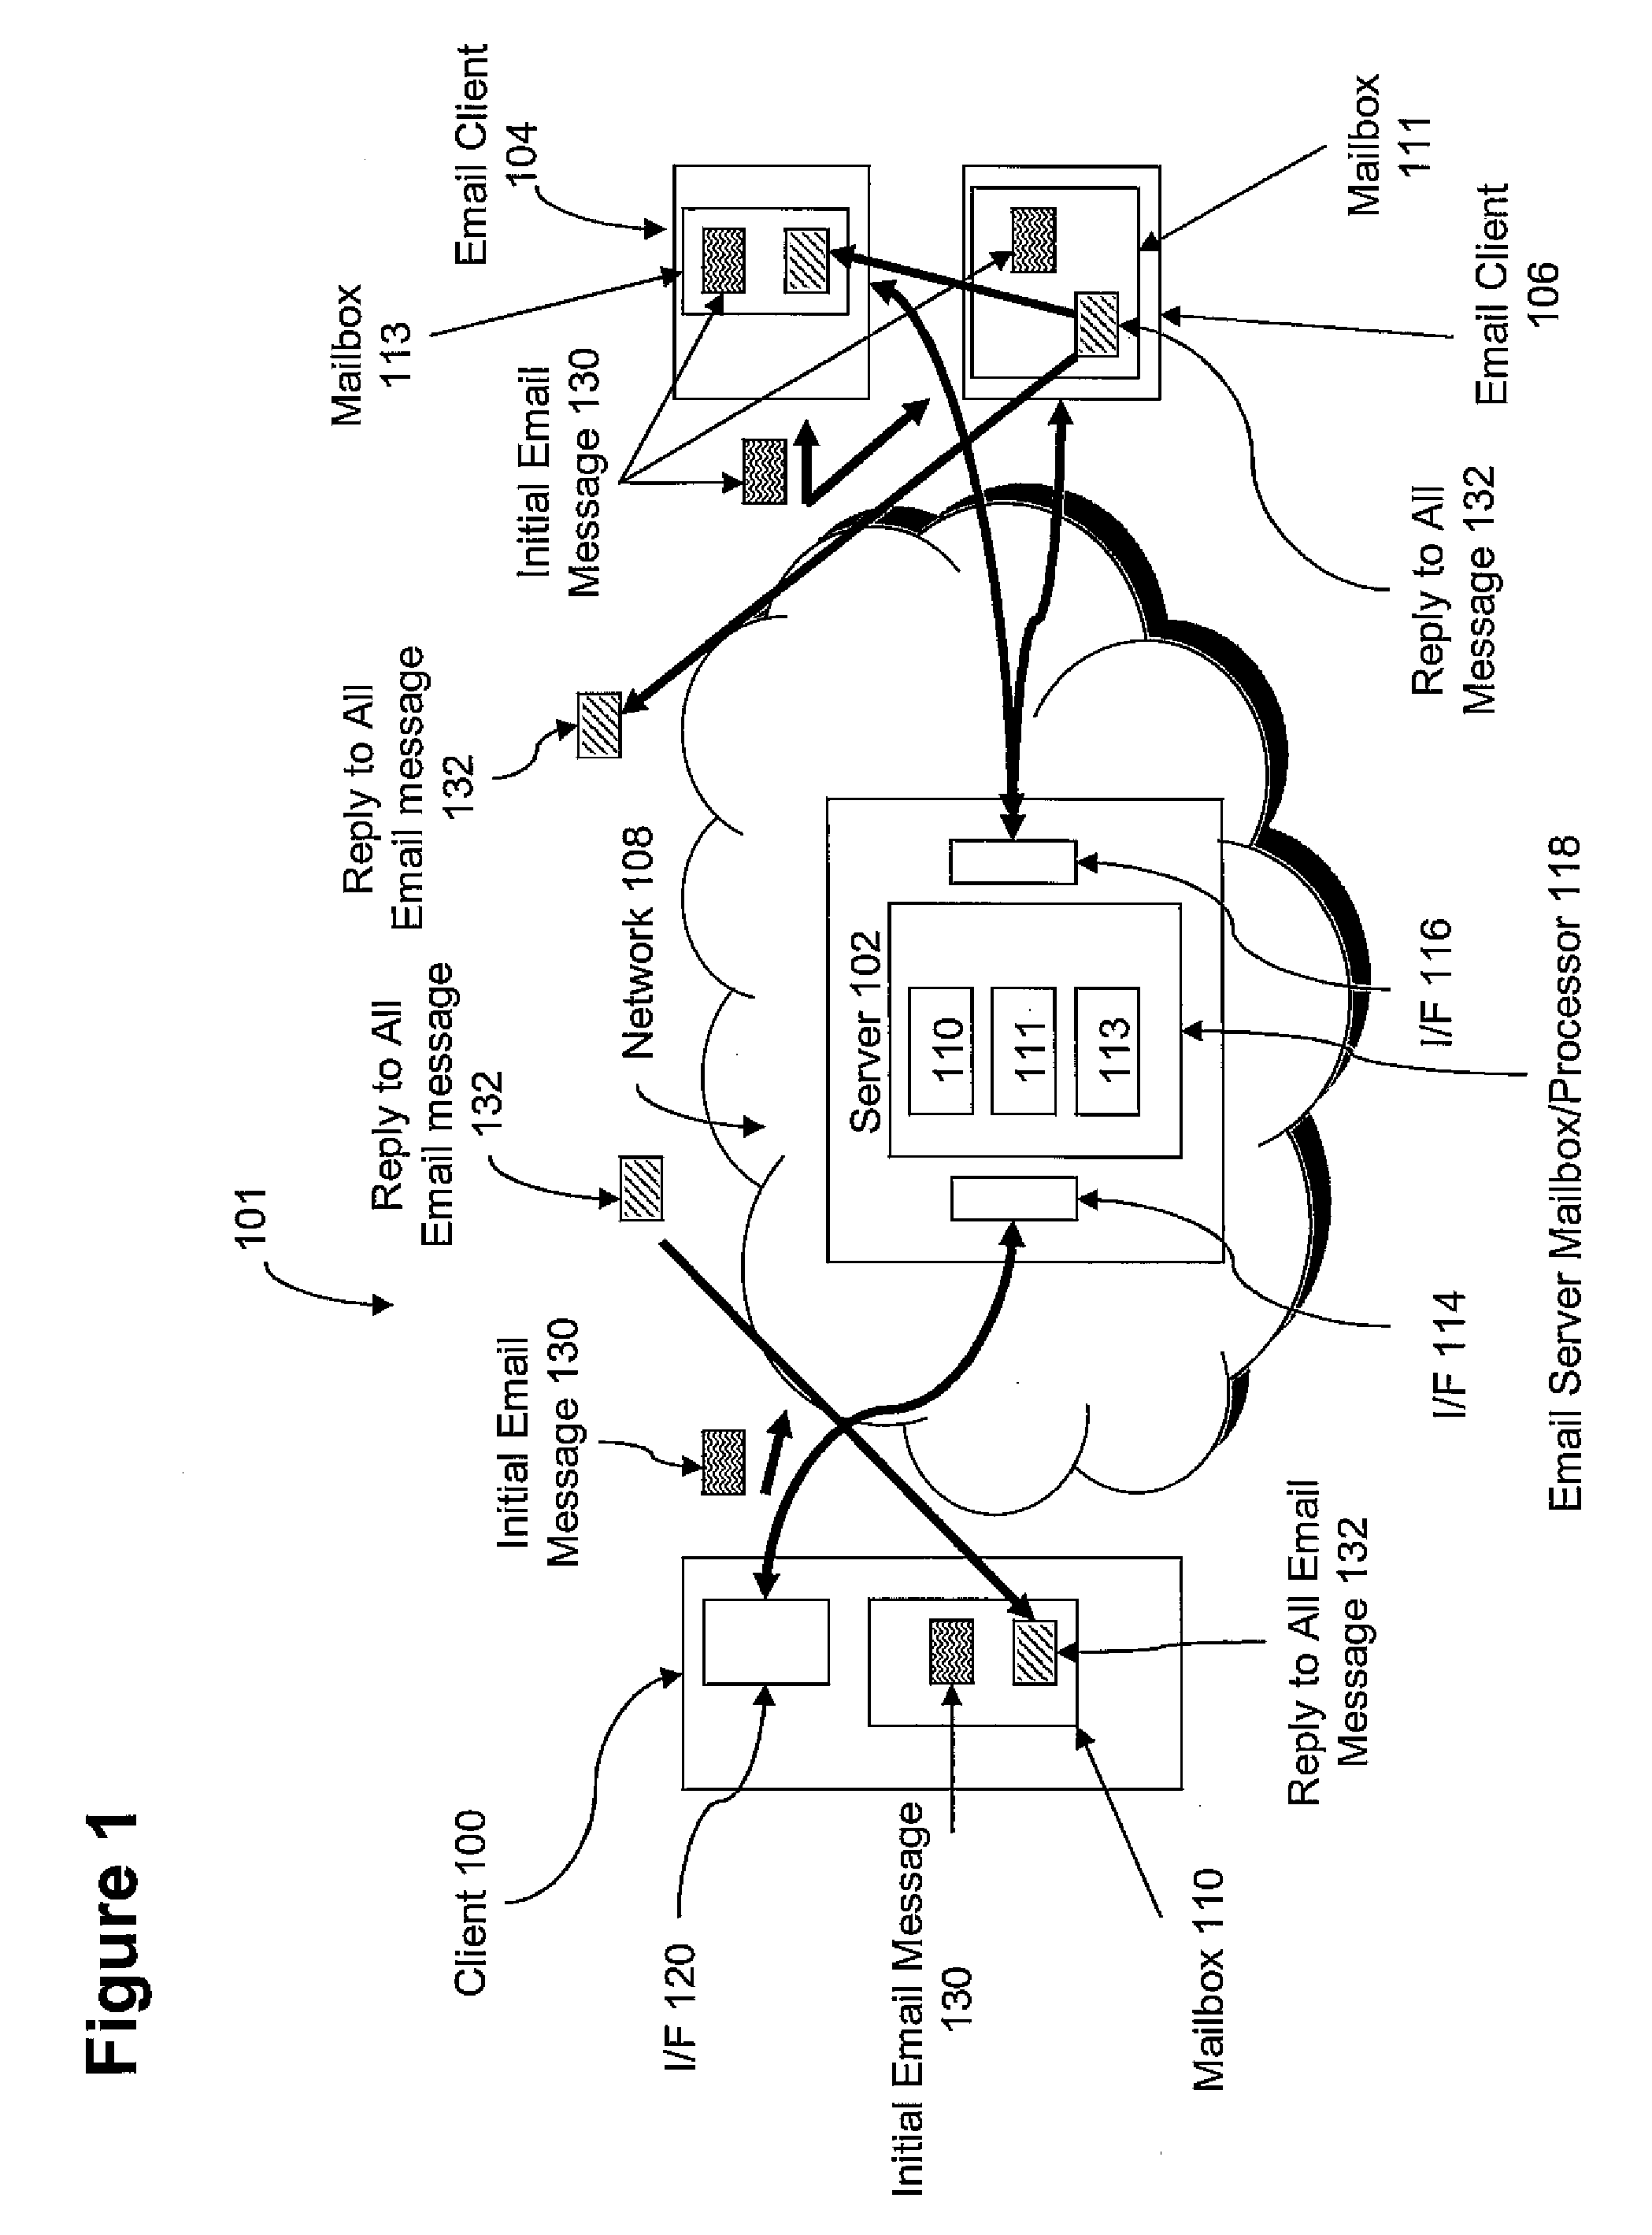 System and method for end-user management of e-mail threads using a single click